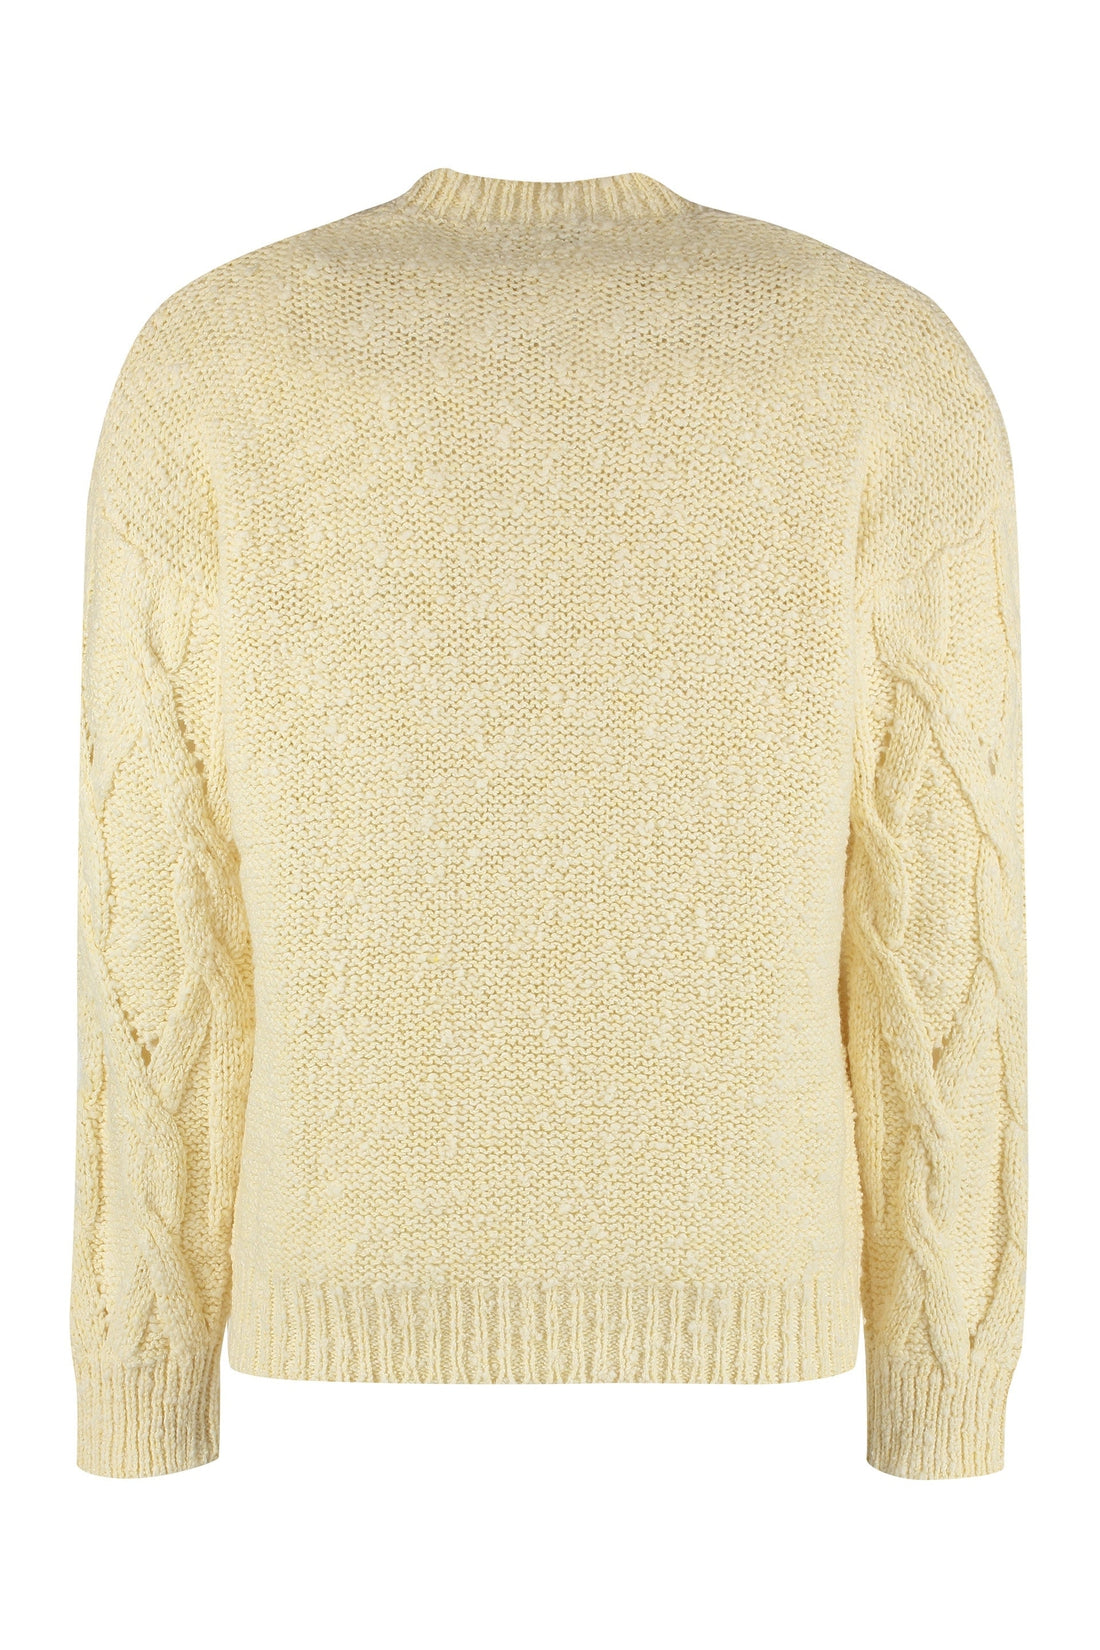 Roberto Collina-OUTLET-SALE-Crew-neck wool sweater-ARCHIVIST